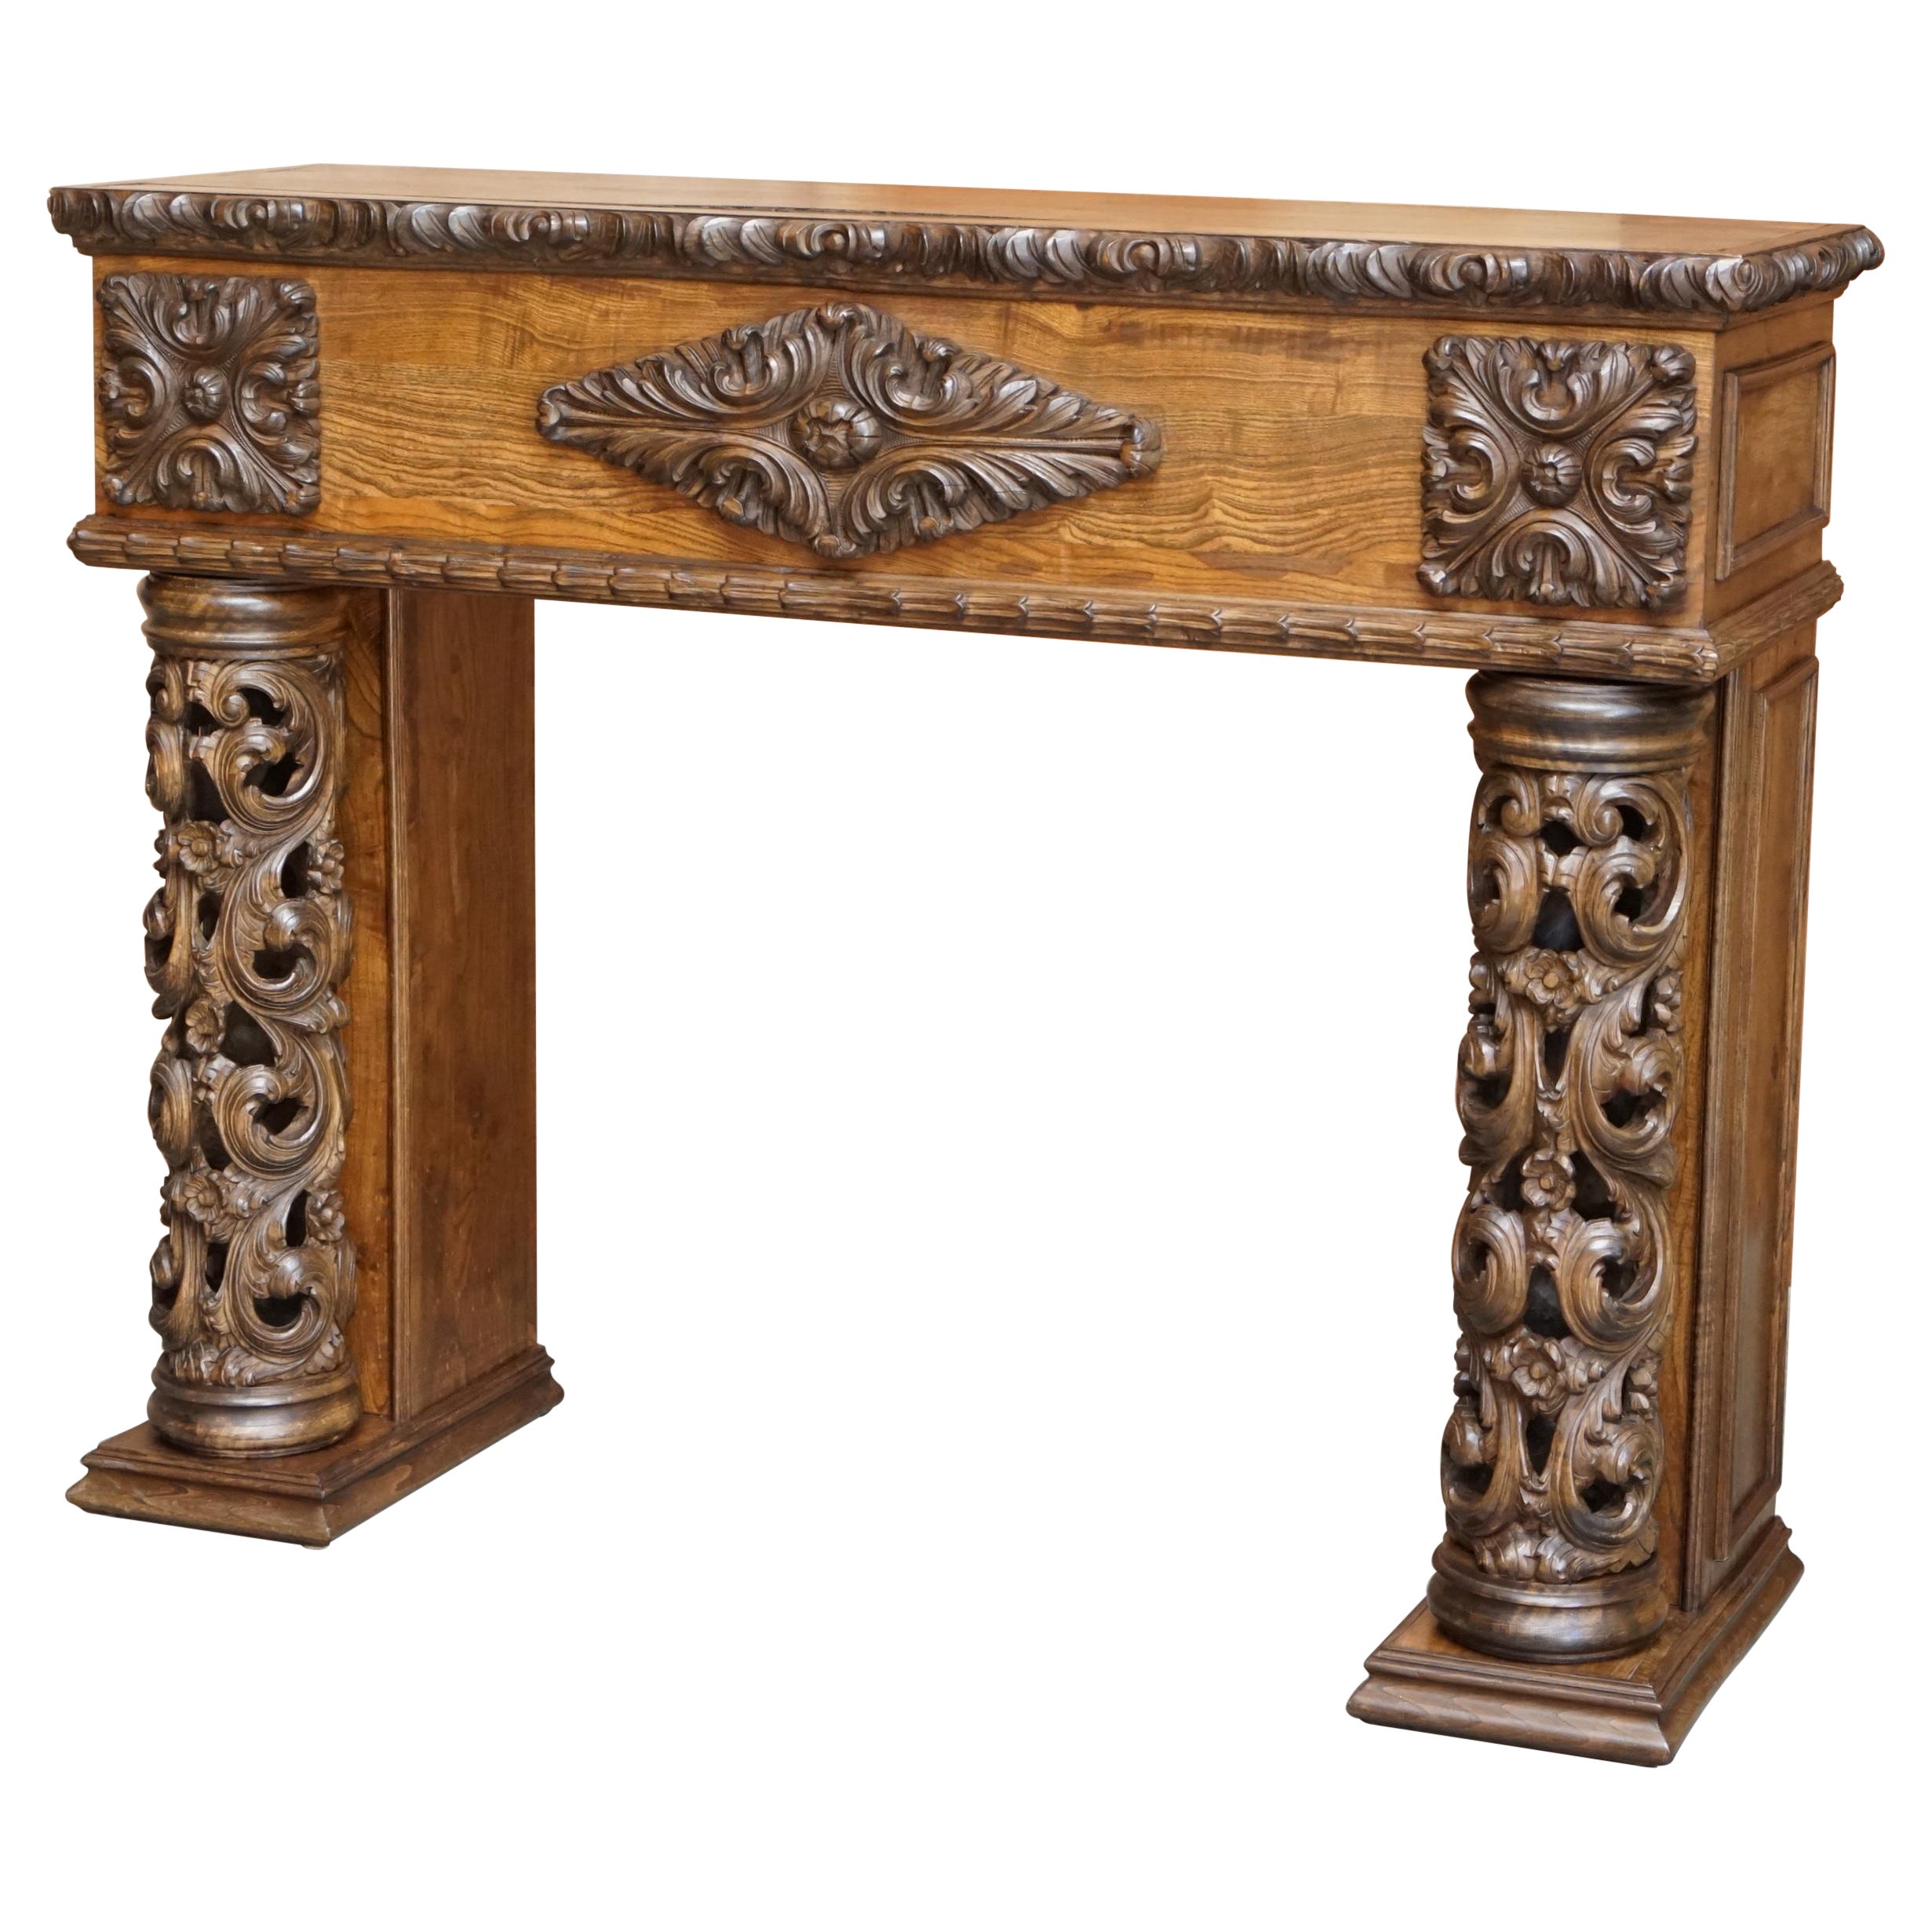 Antique circa 1880 Hand Carved Solid Elm Fireplace Mantlepiece Fretwork Columns For Sale